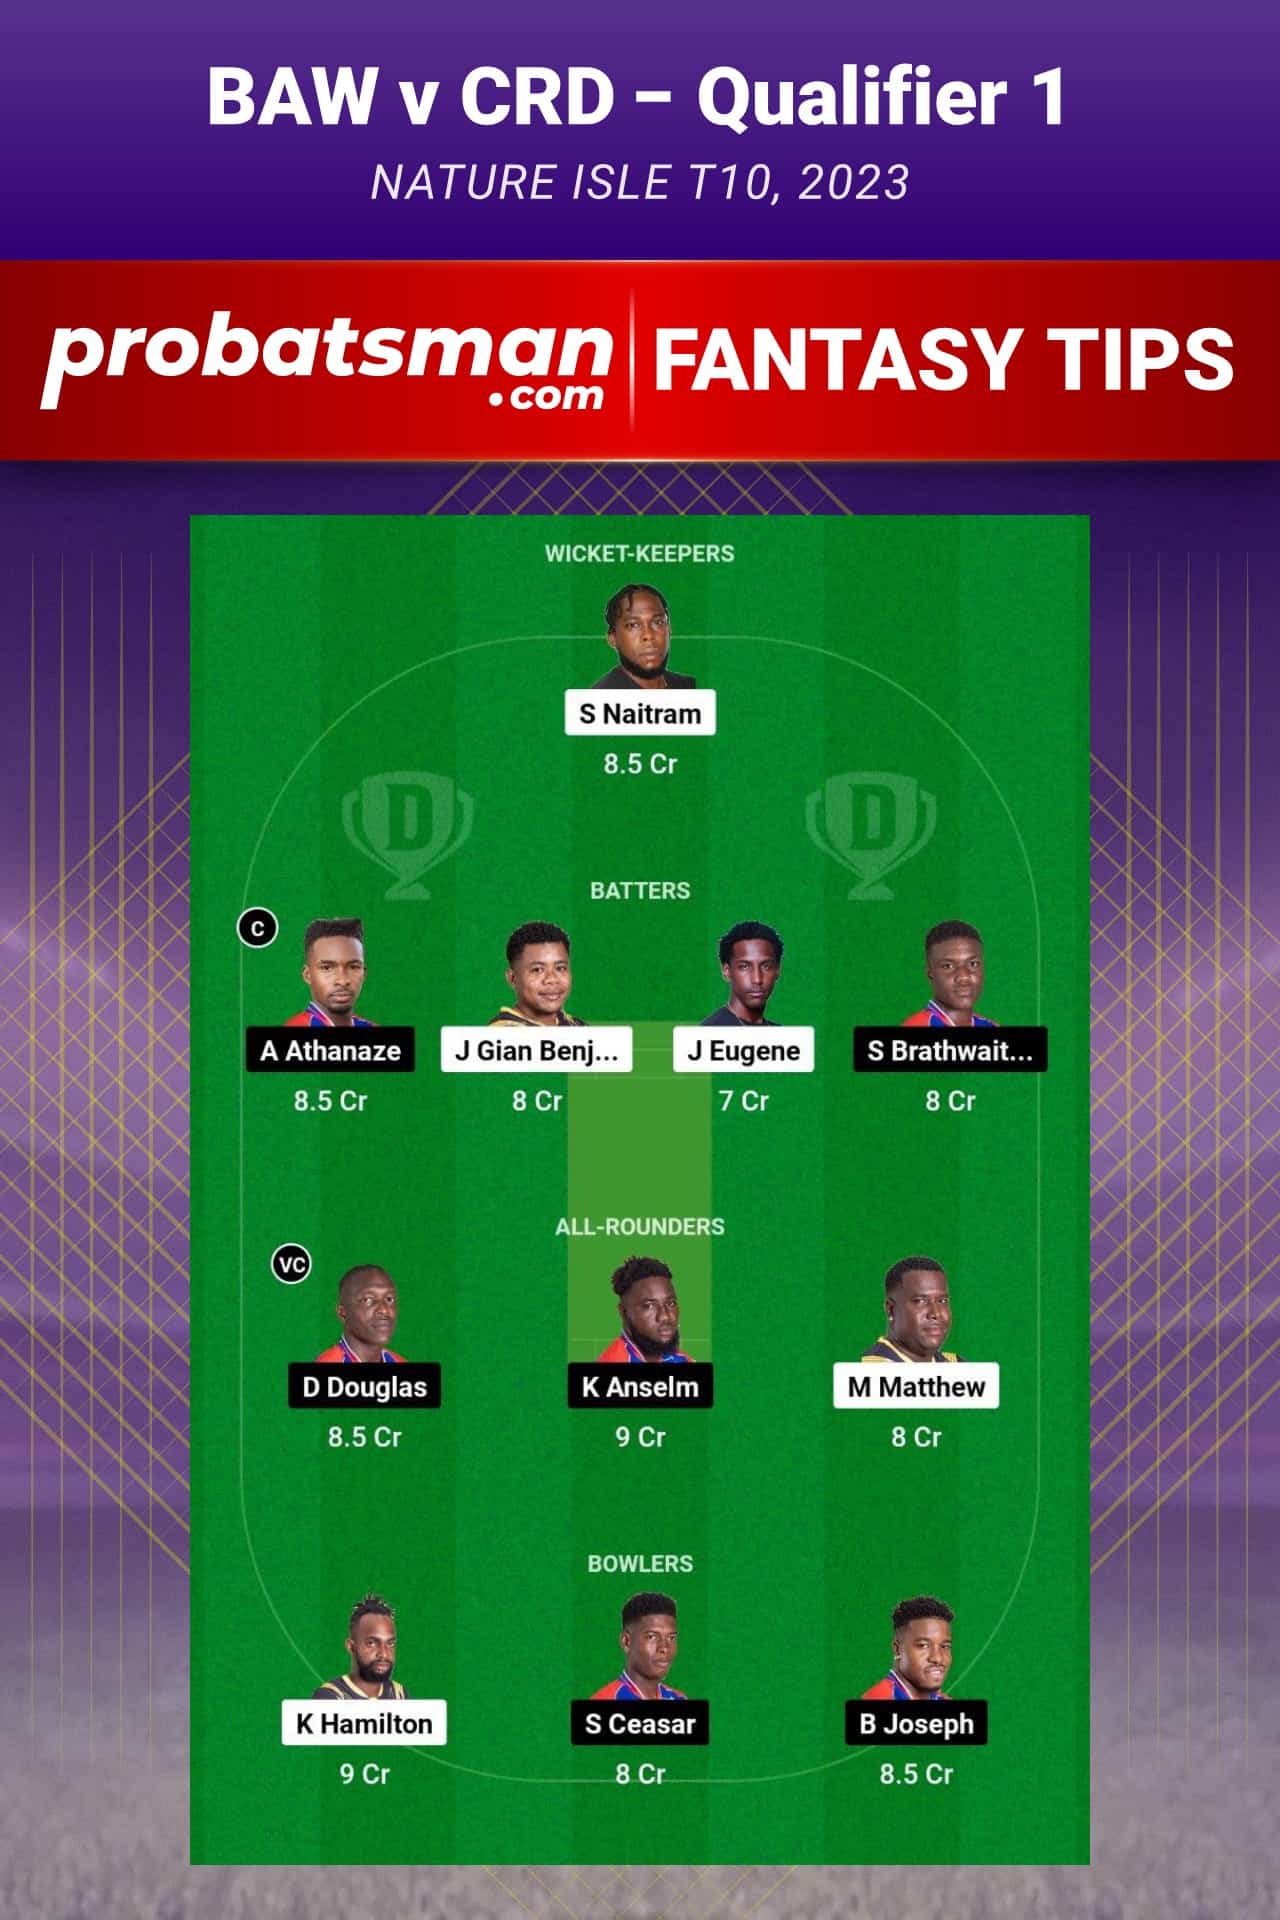 BAW vs CRD Dream11 Prediction With Stats, Pitch Report & Player Record of Nature Isle T10, 2023 For Qualifier 1